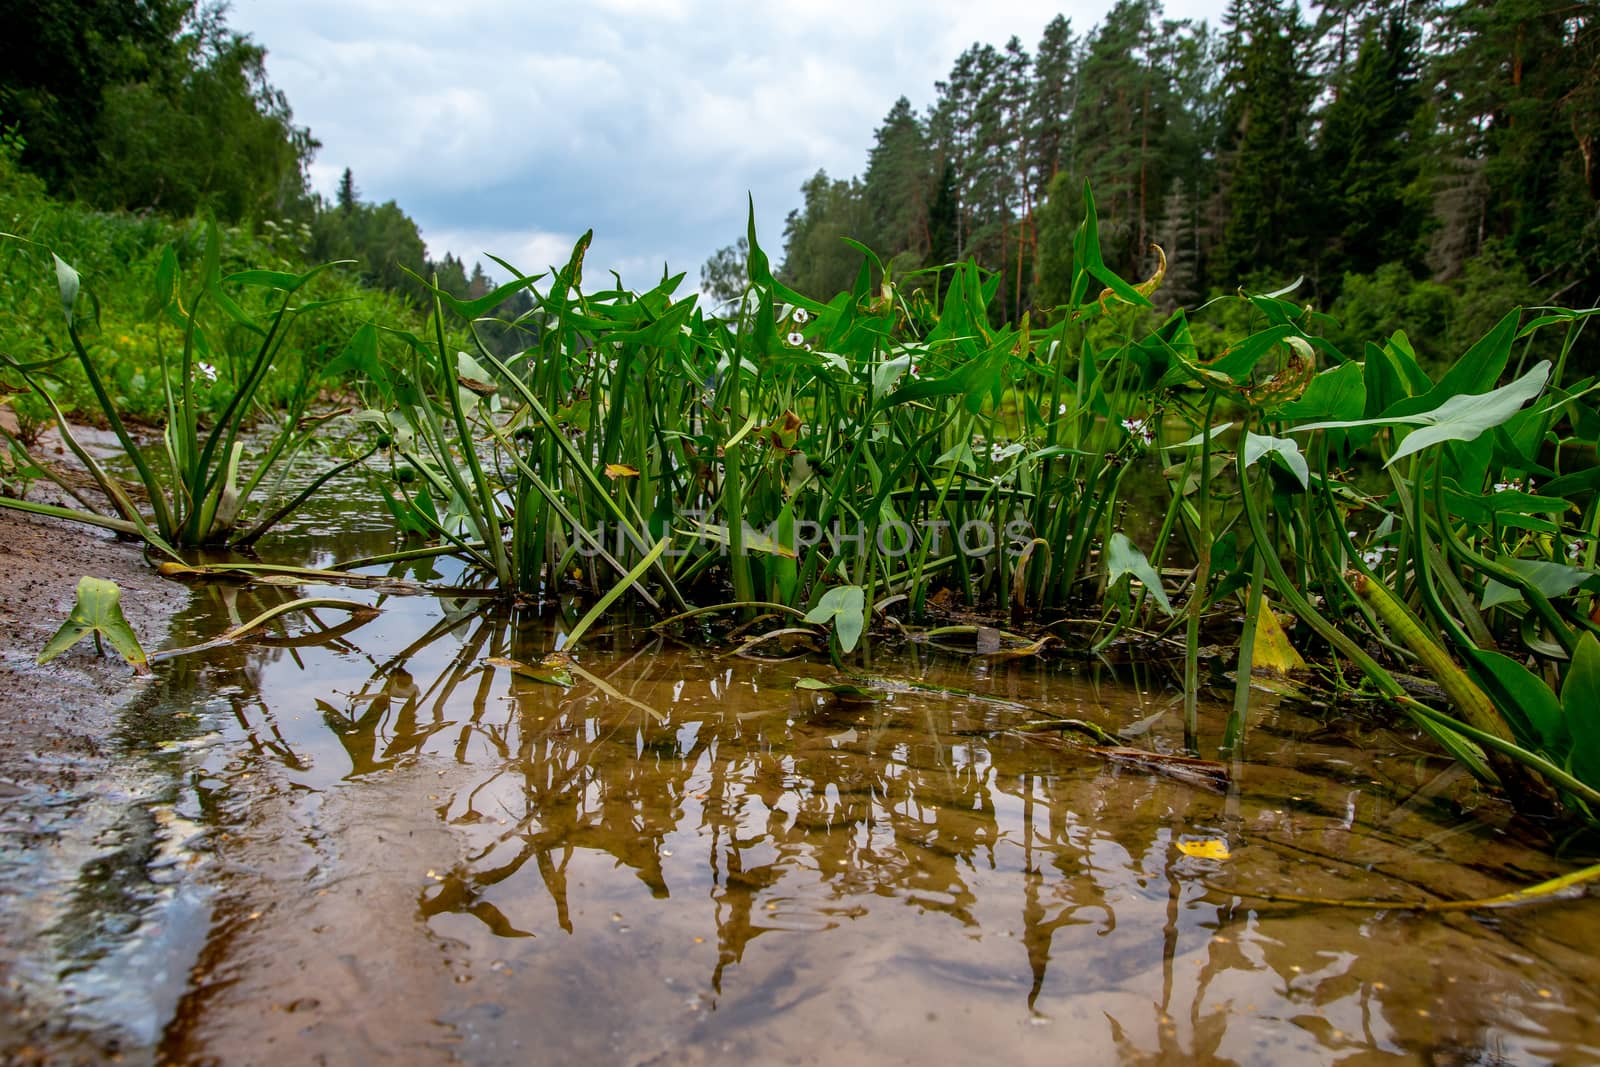 The river shore is overgrown with grass and water plants. in Latvia. The Gauja is the longest river in Latvia, which is located only in the territory of Latvia. 

